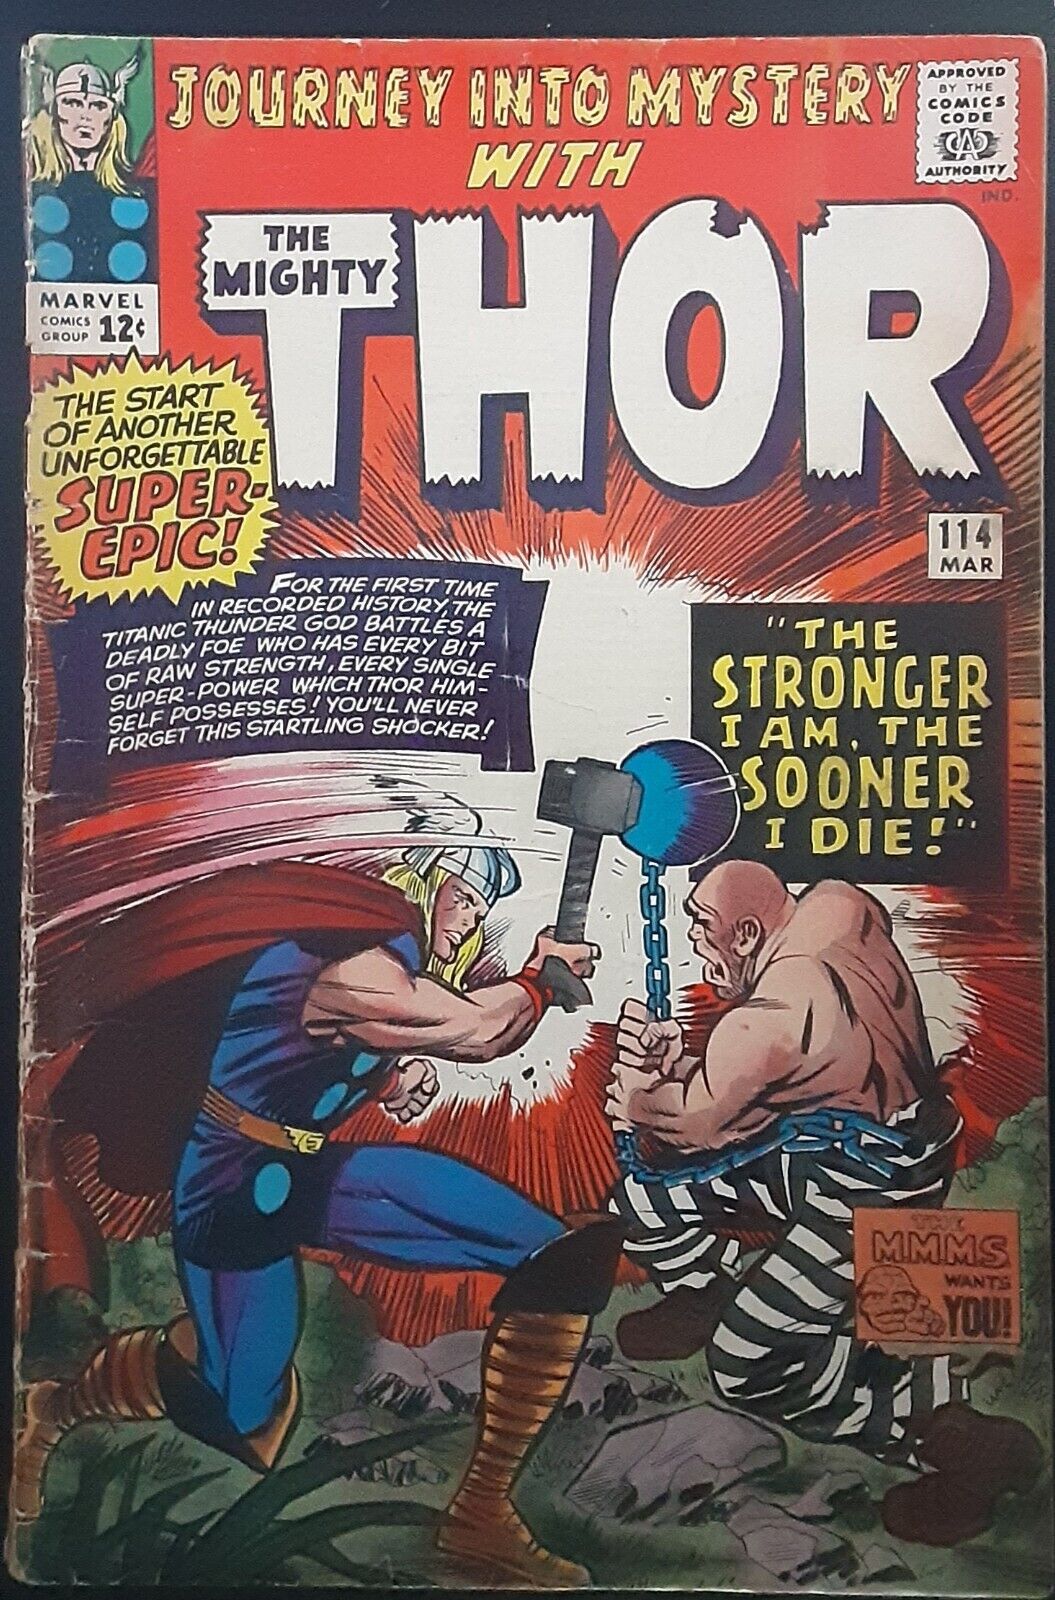 JOURNEY INTO MYSTERY #114 (1965) - GRADE 5.0 - 1ST APPEARANCE OF ABSORBING MAN!